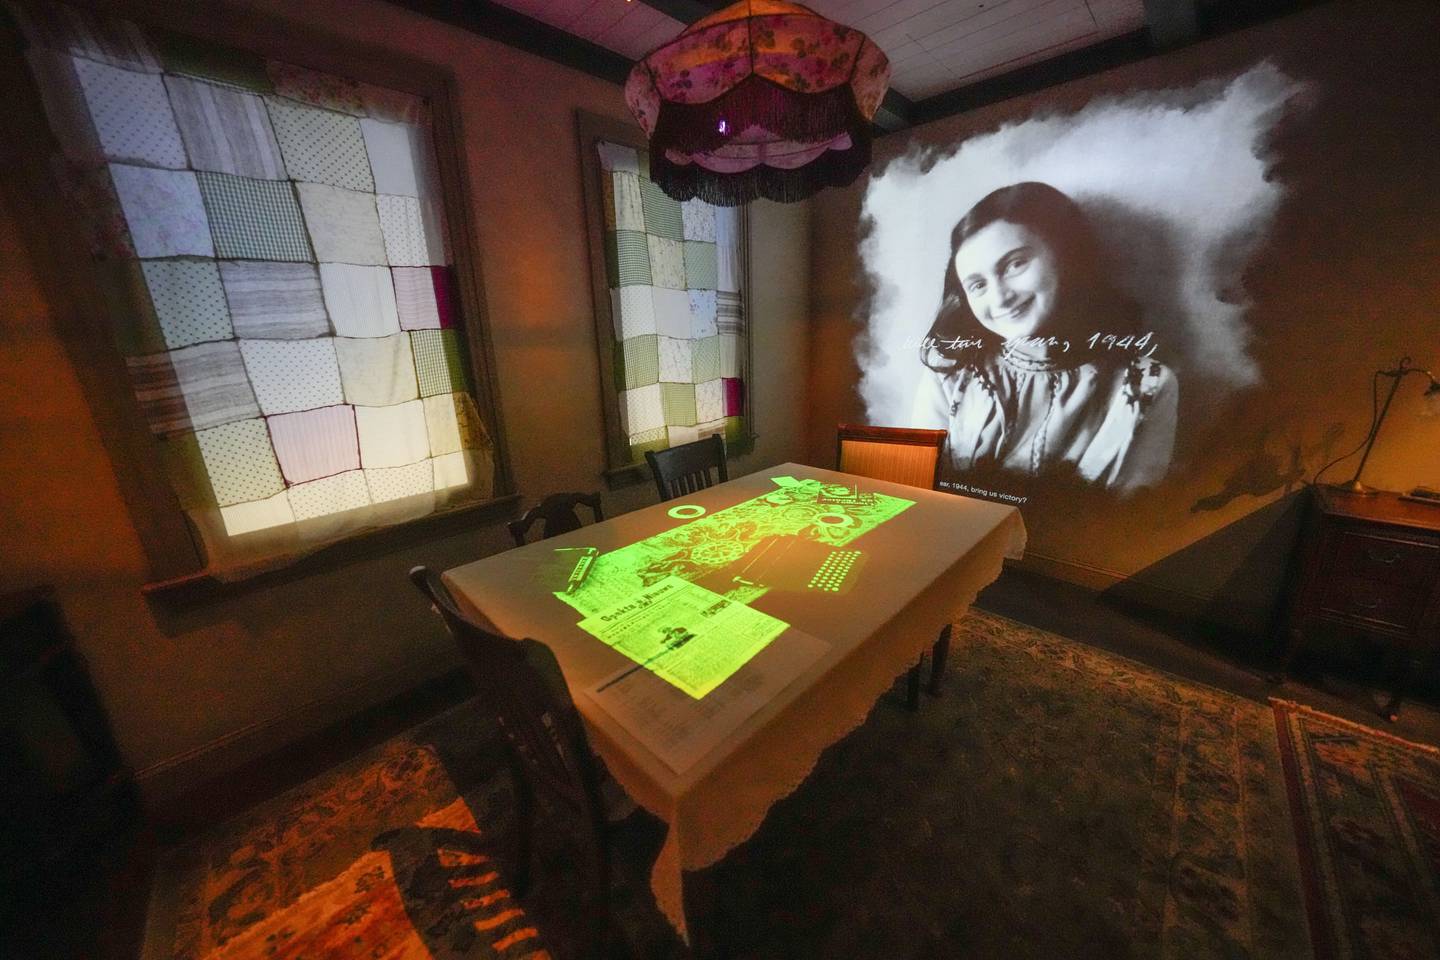 A portrait of Anne Frank is part of a replica of the home in Amsterdam where she hid, as part of the new pavilion opening at the National World War II Museum in New Orleans, Tuesday, Oct. 31, 2023.